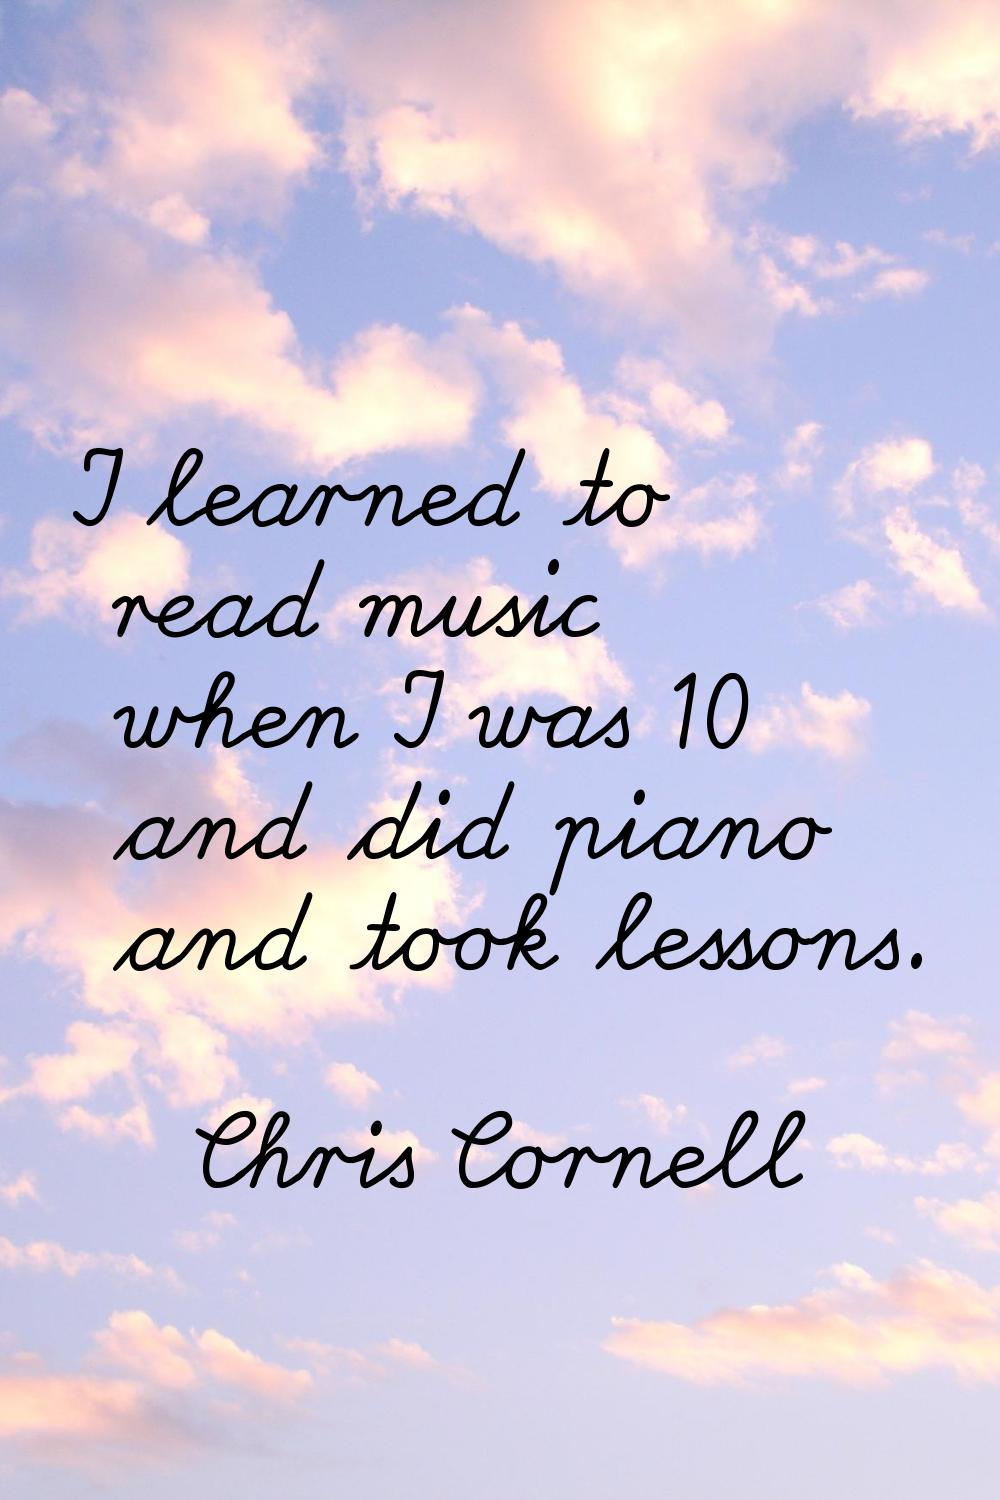 I learned to read music when I was 10 and did piano and took lessons.